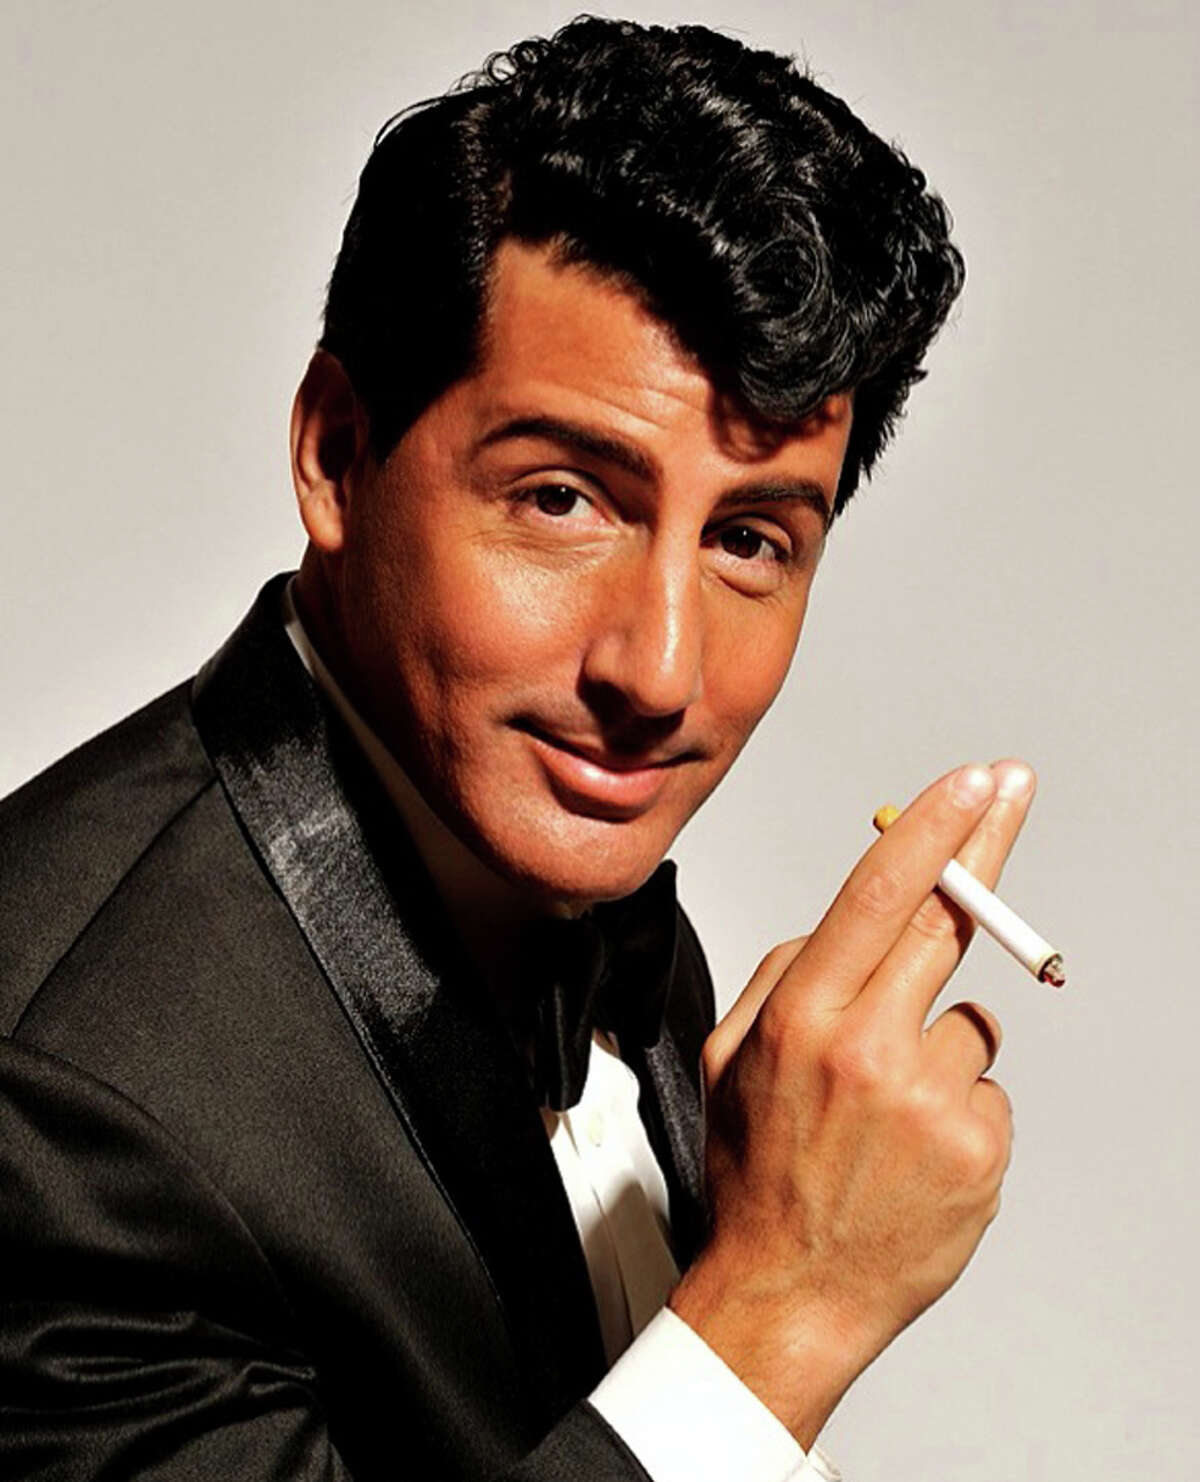 New Haven native Drew Anthony is coming home this weekend as the great singer-actor Dean Martin in "The Rat Pack is Back" at the Shubert Theater on Saturday Feb. 19 and Sunday Feb. 20.